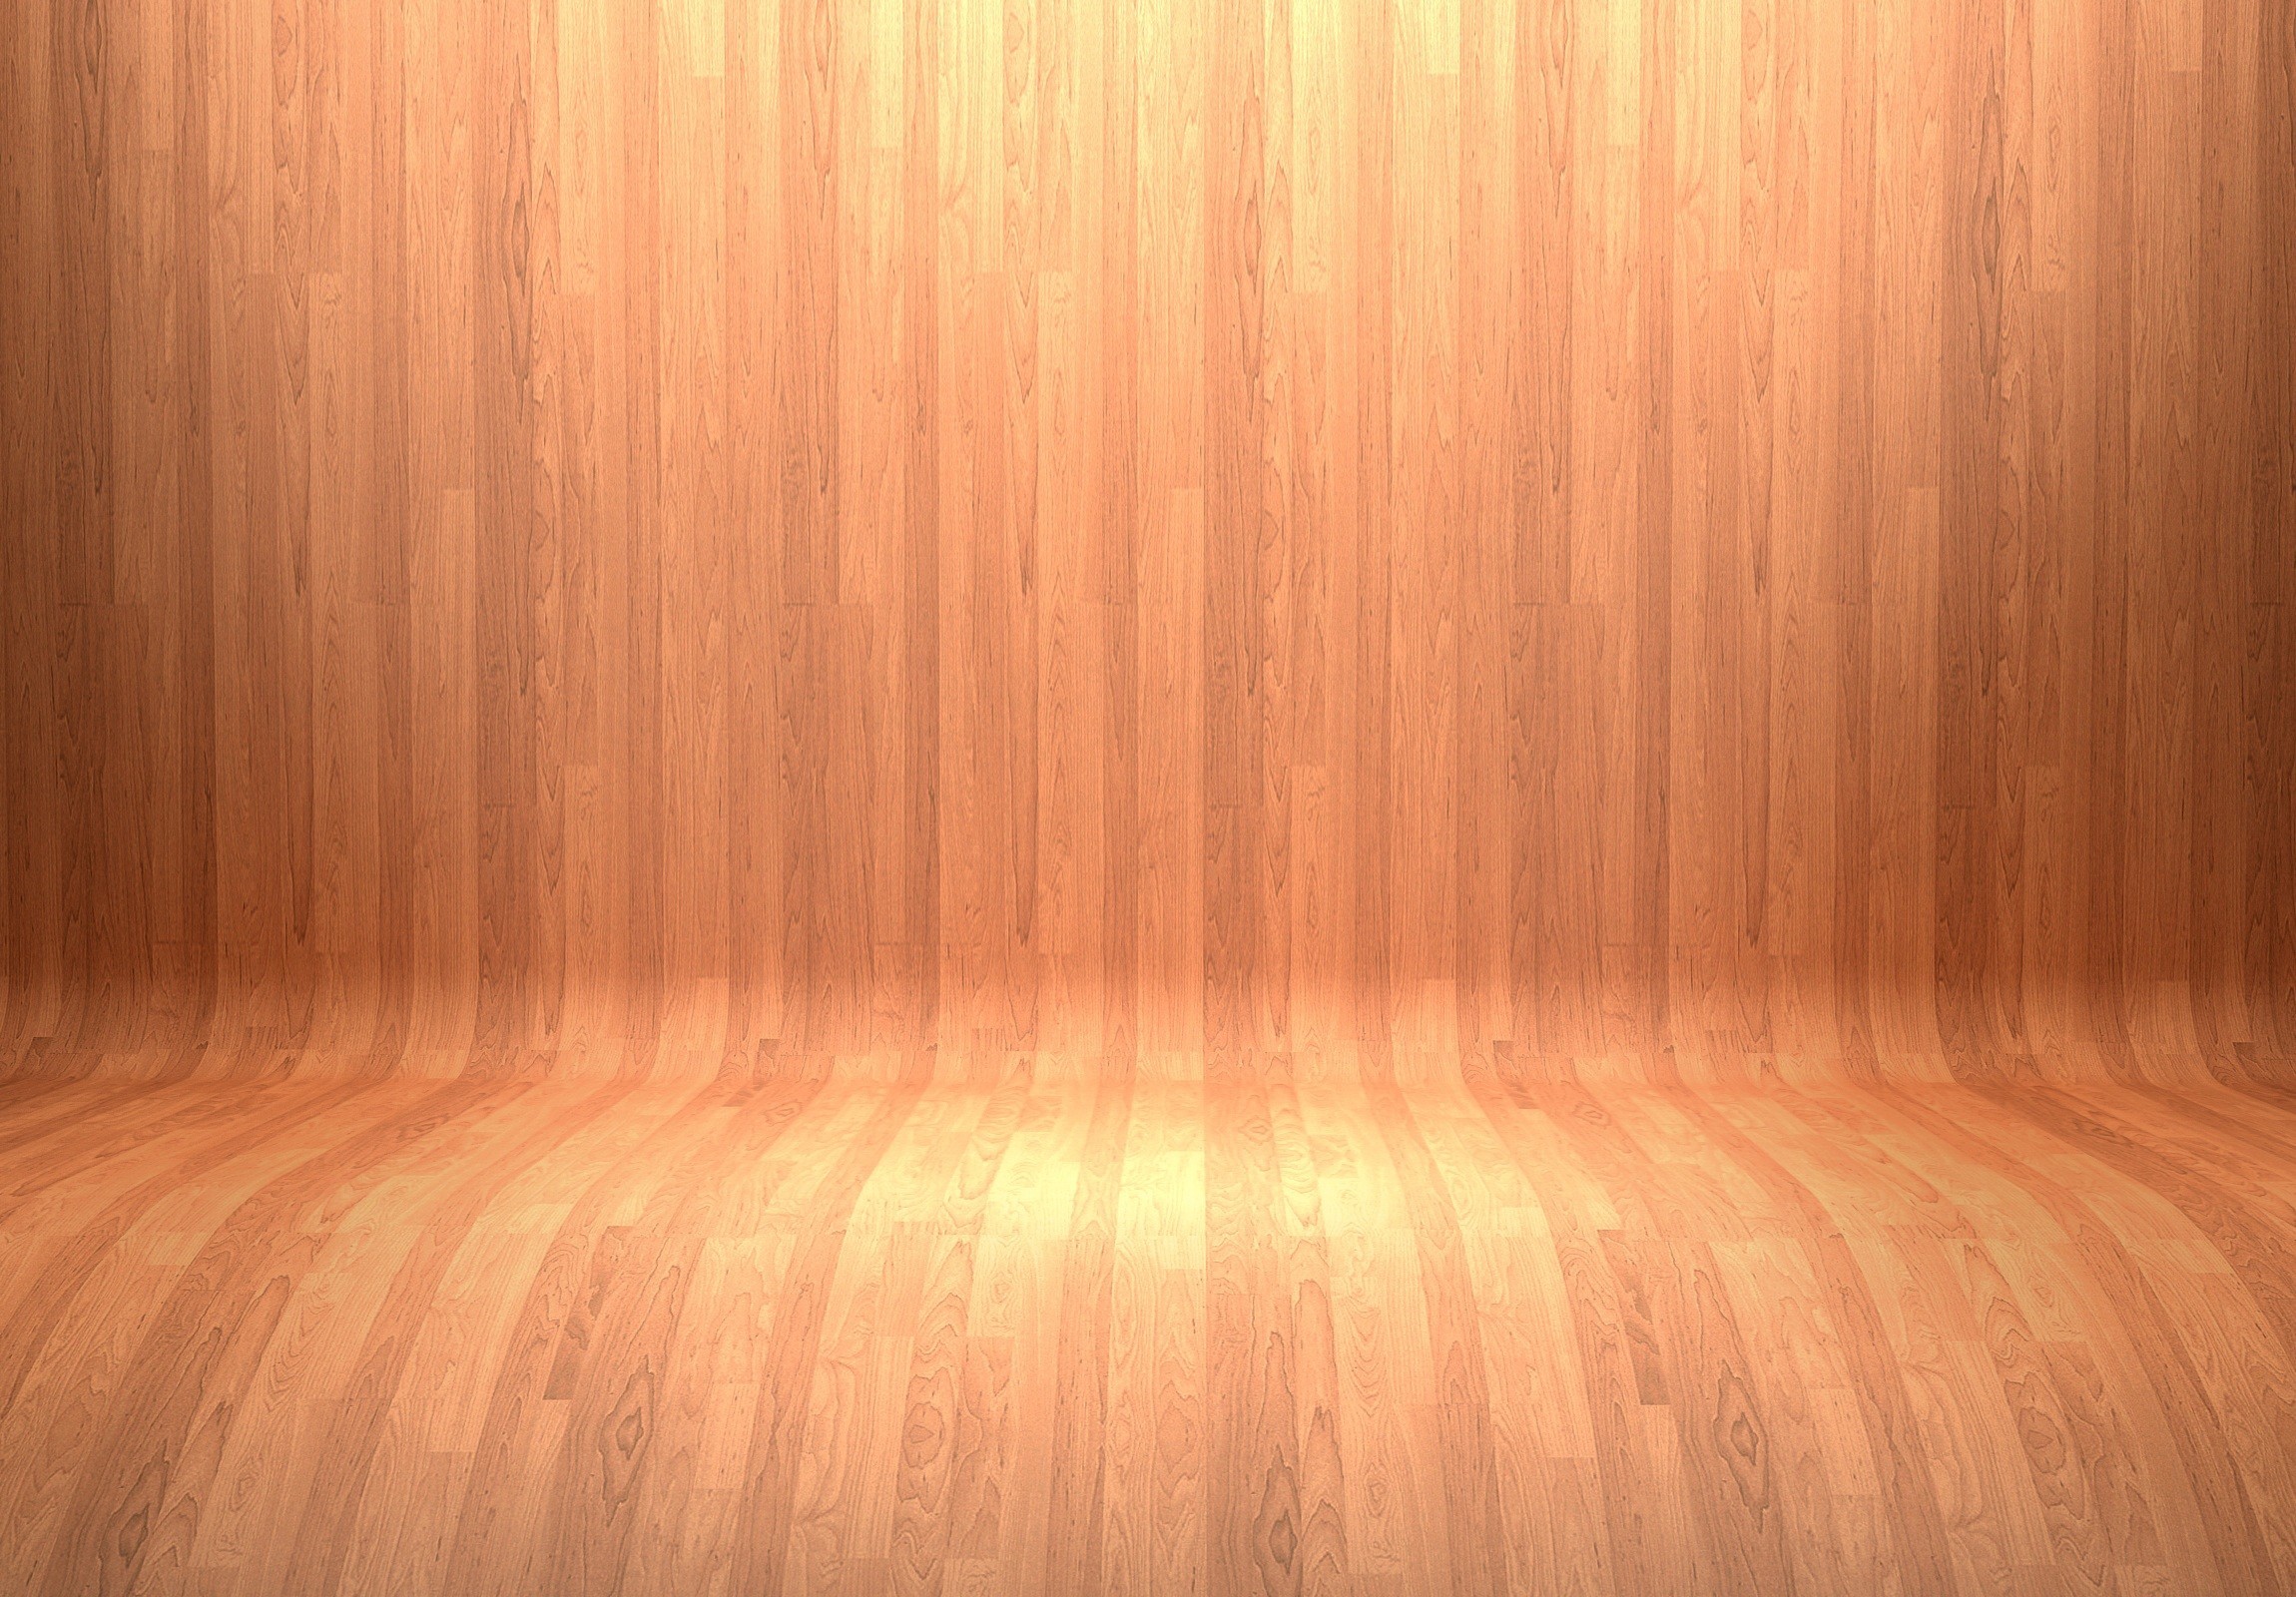 2300x1600 stage-background-images-2300Ã1600-free-download-WTG20064739